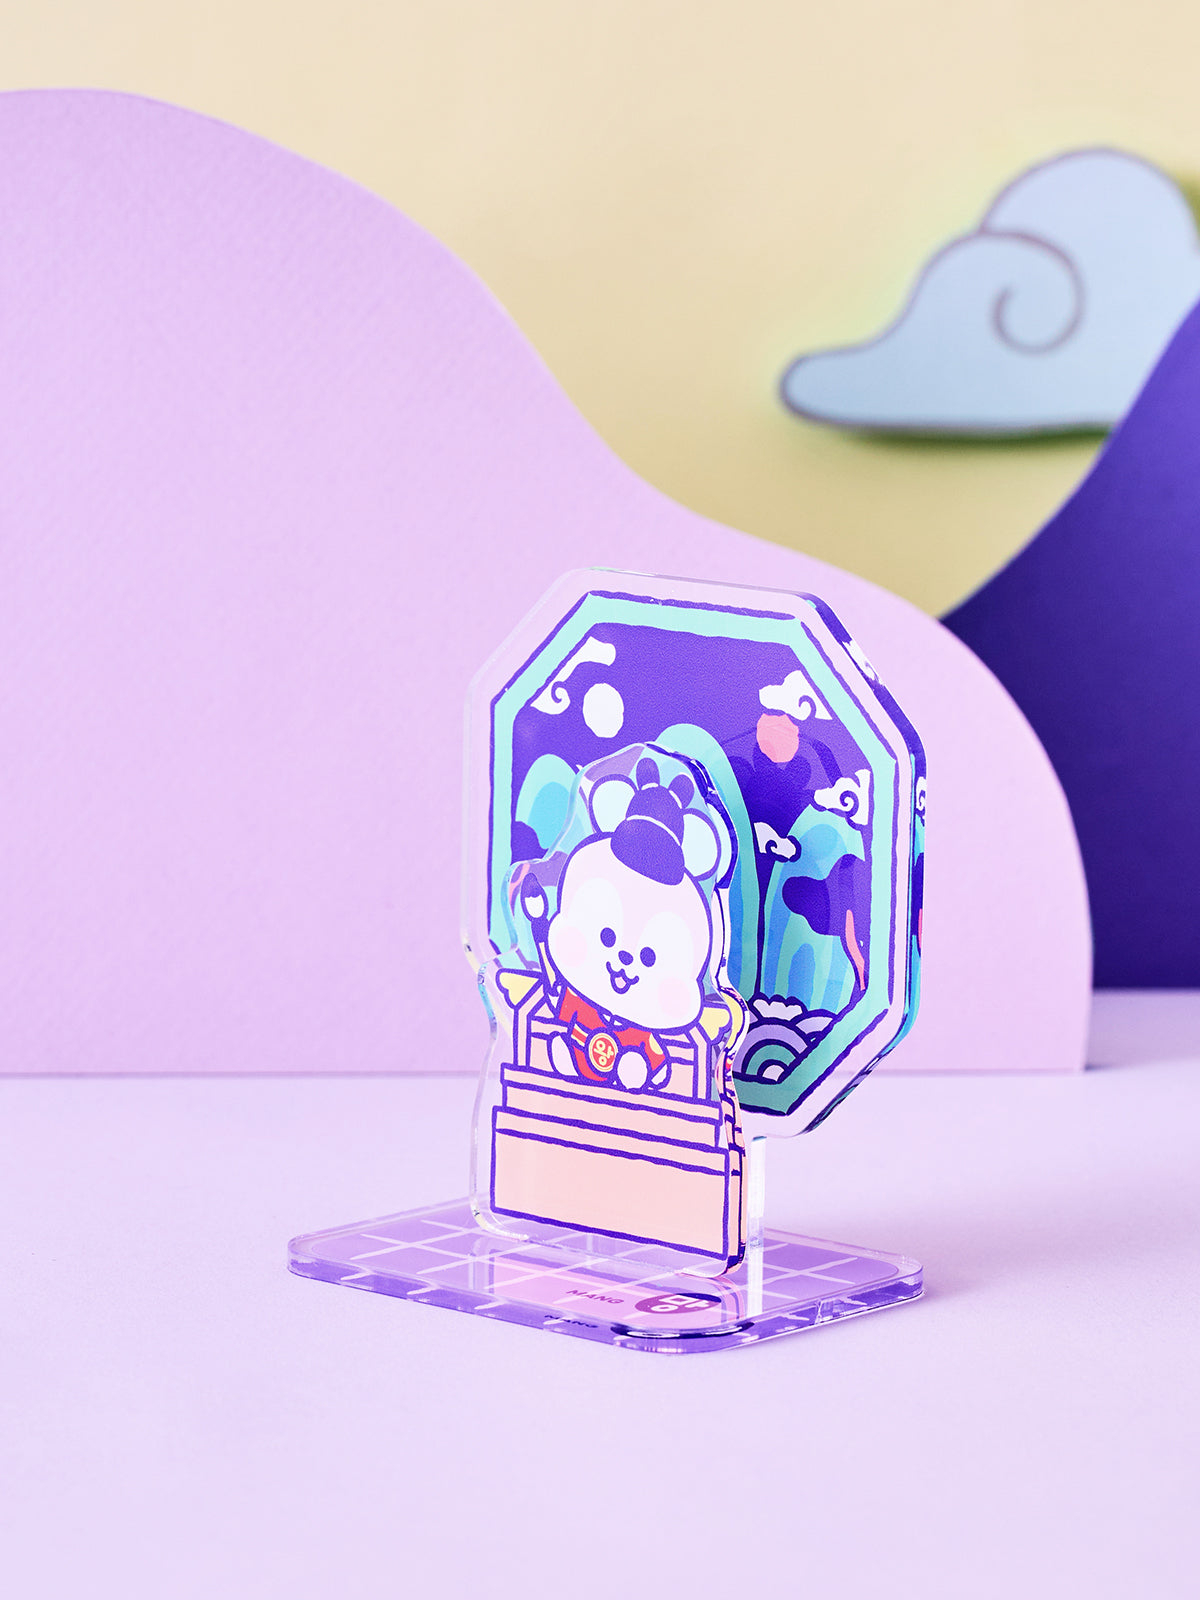 BT21 BABY ACRYLIC STAND K-EDITION ver.2